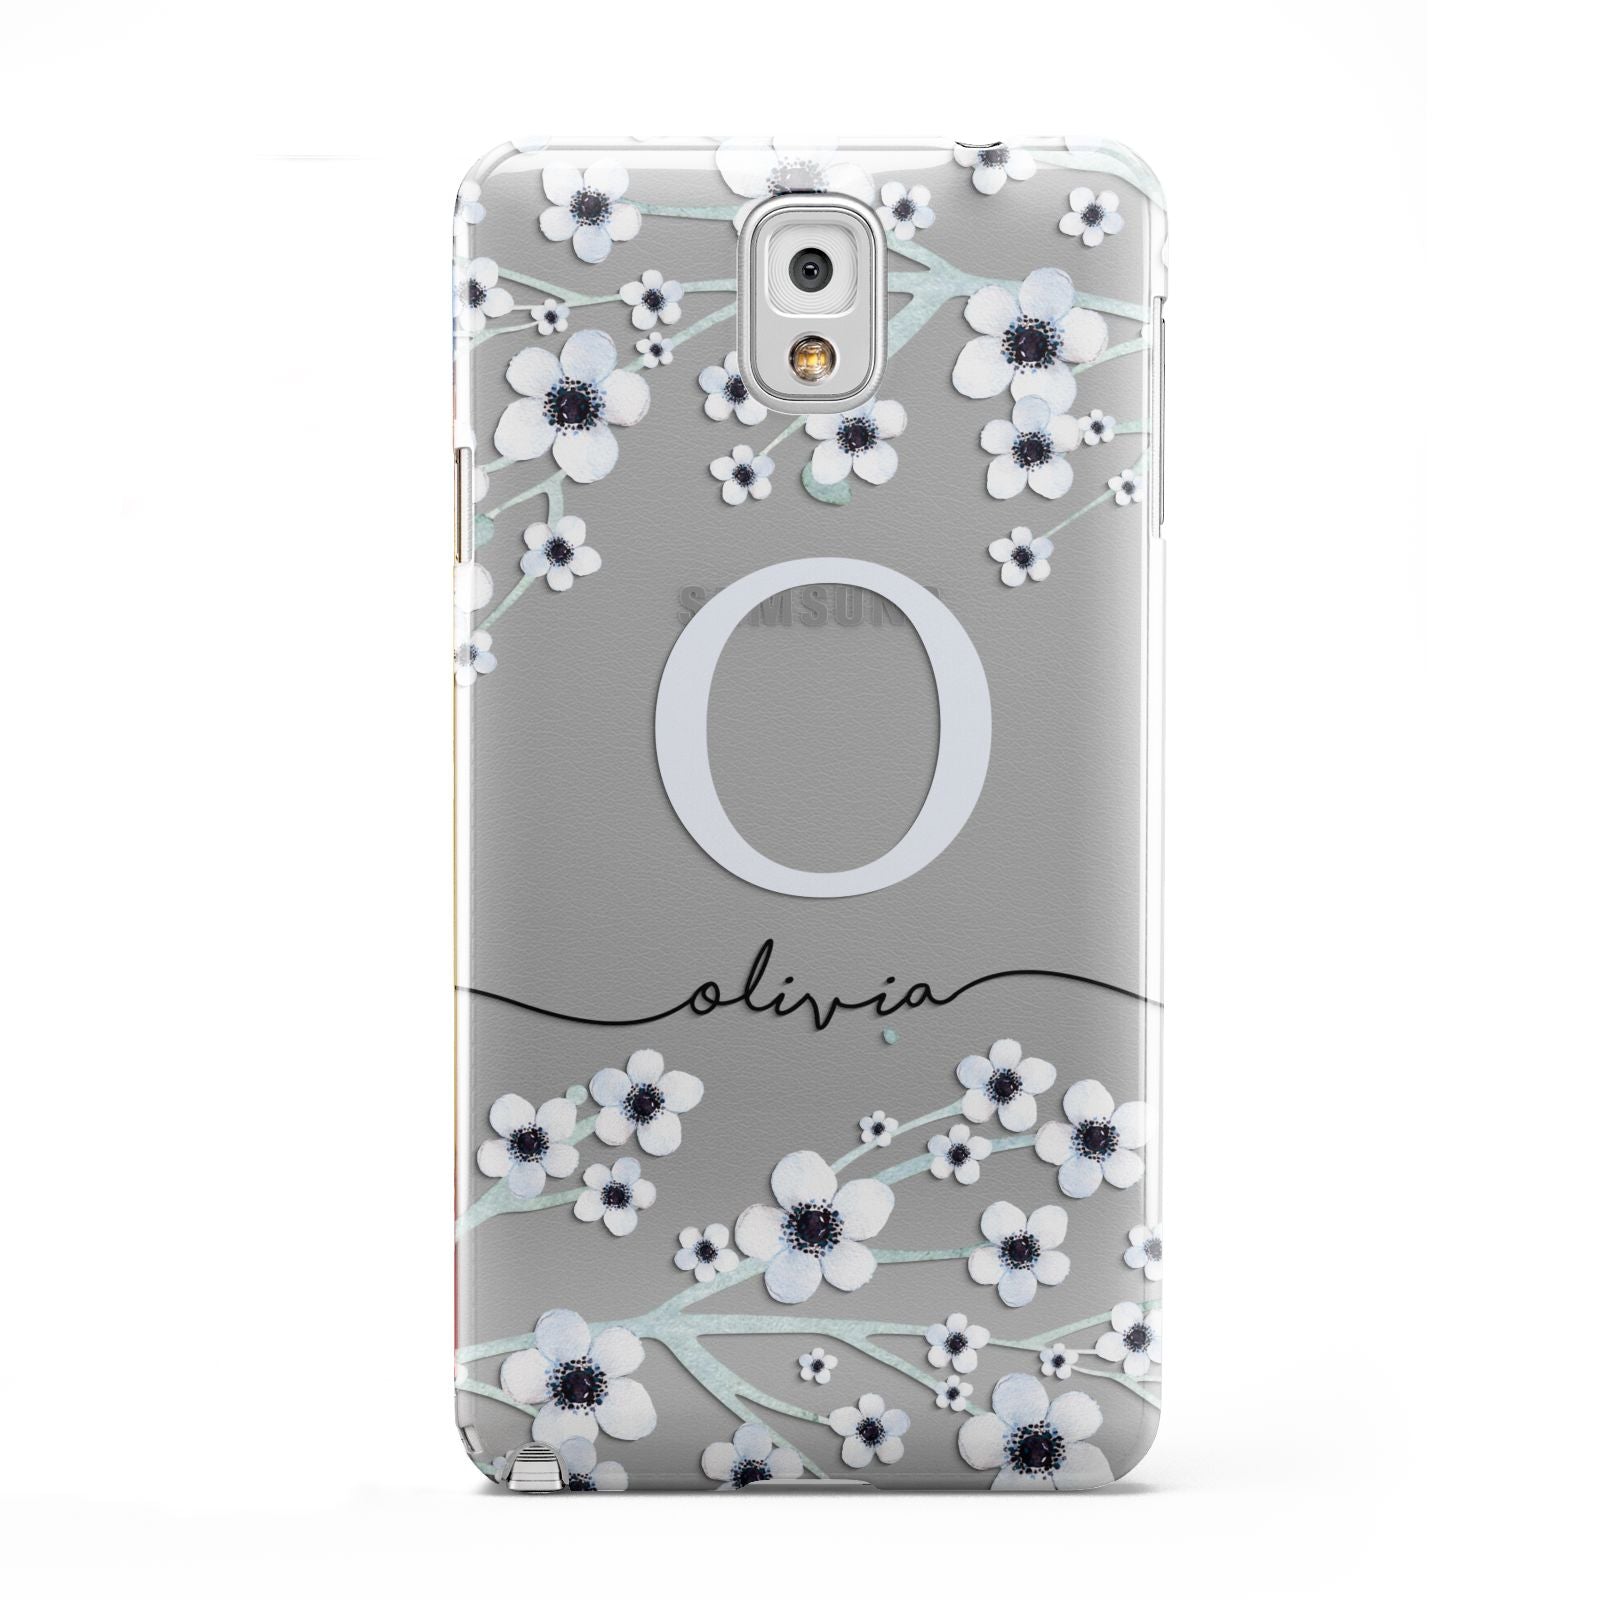 Personalised White Flower Samsung Galaxy Note 3 Case